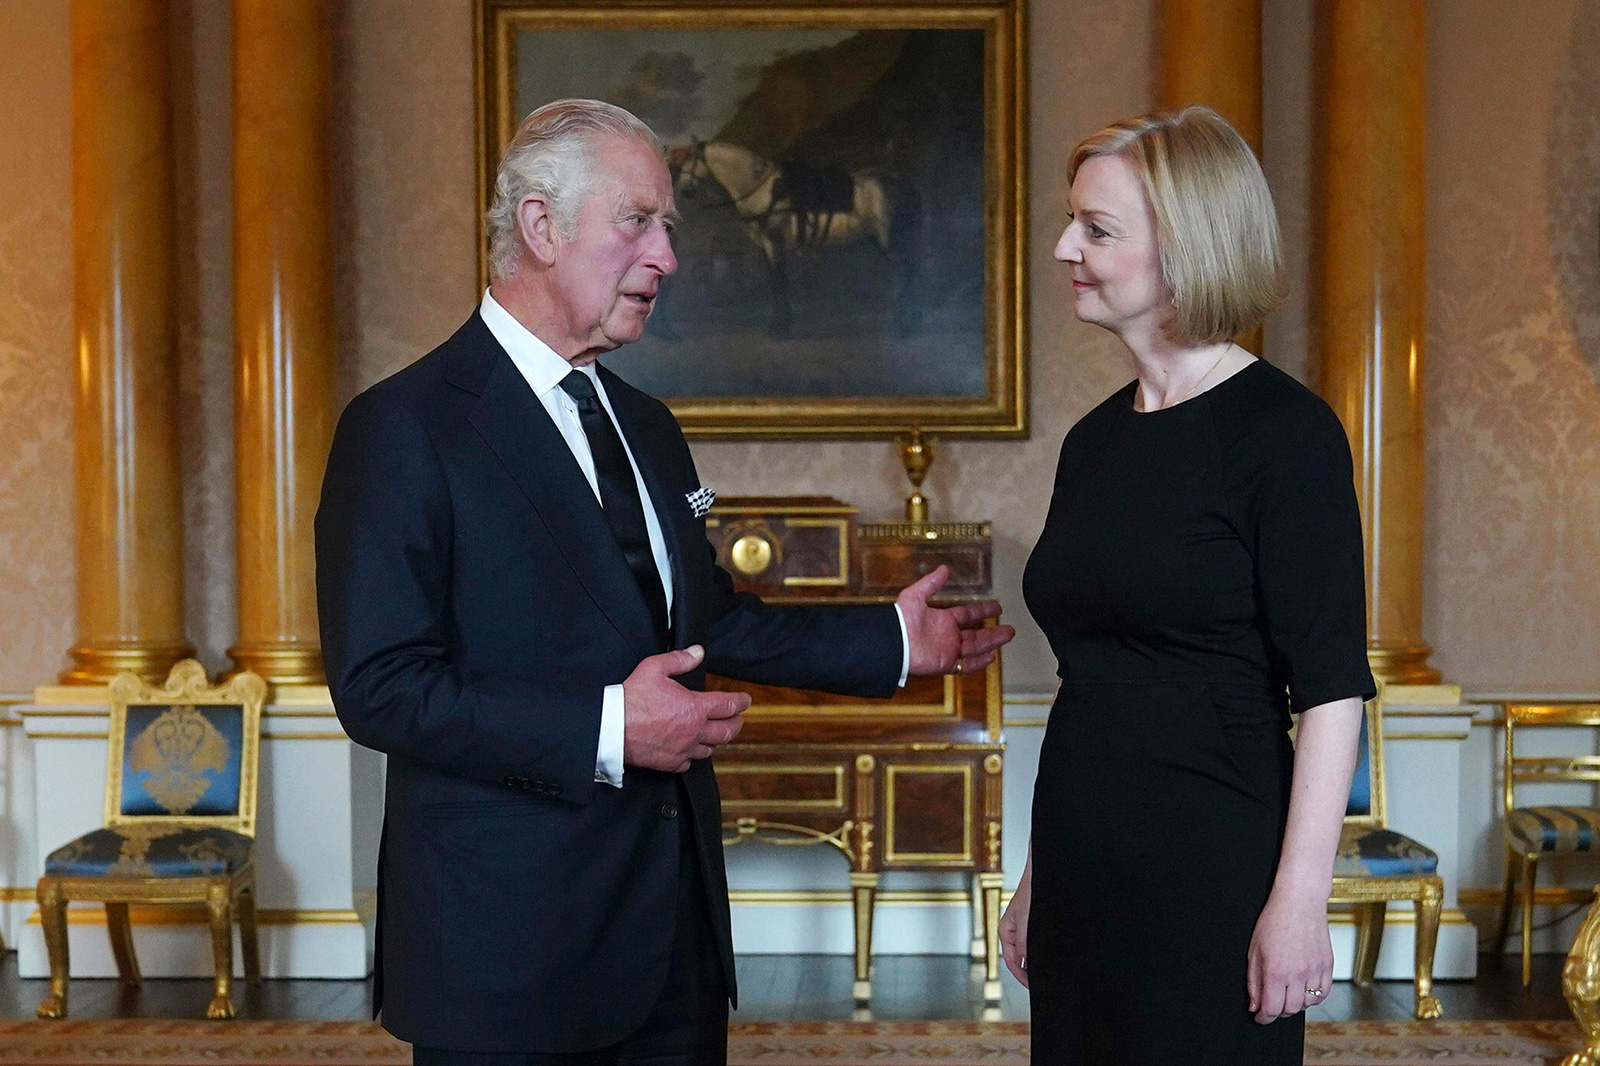 King Charles III during his first audience with Prime Minister Liz Truss at Buckingham Palace on Friday, September 9.